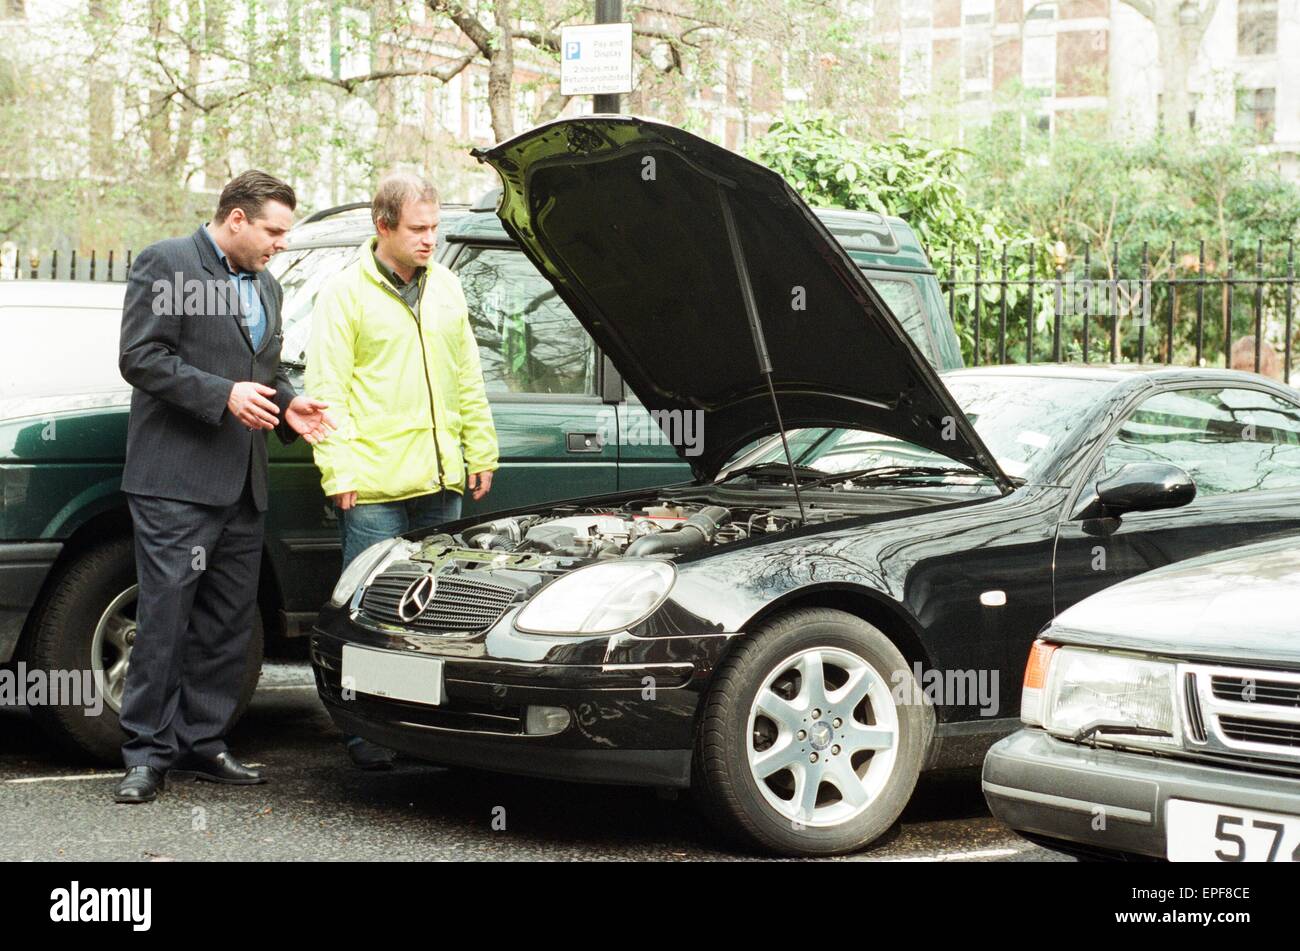 Harry Enfield sells his motorcar - SLK230 Mercedes - to Sunday Mirror Journalist Sean Hoare, 26th March 1999. Stock Photo